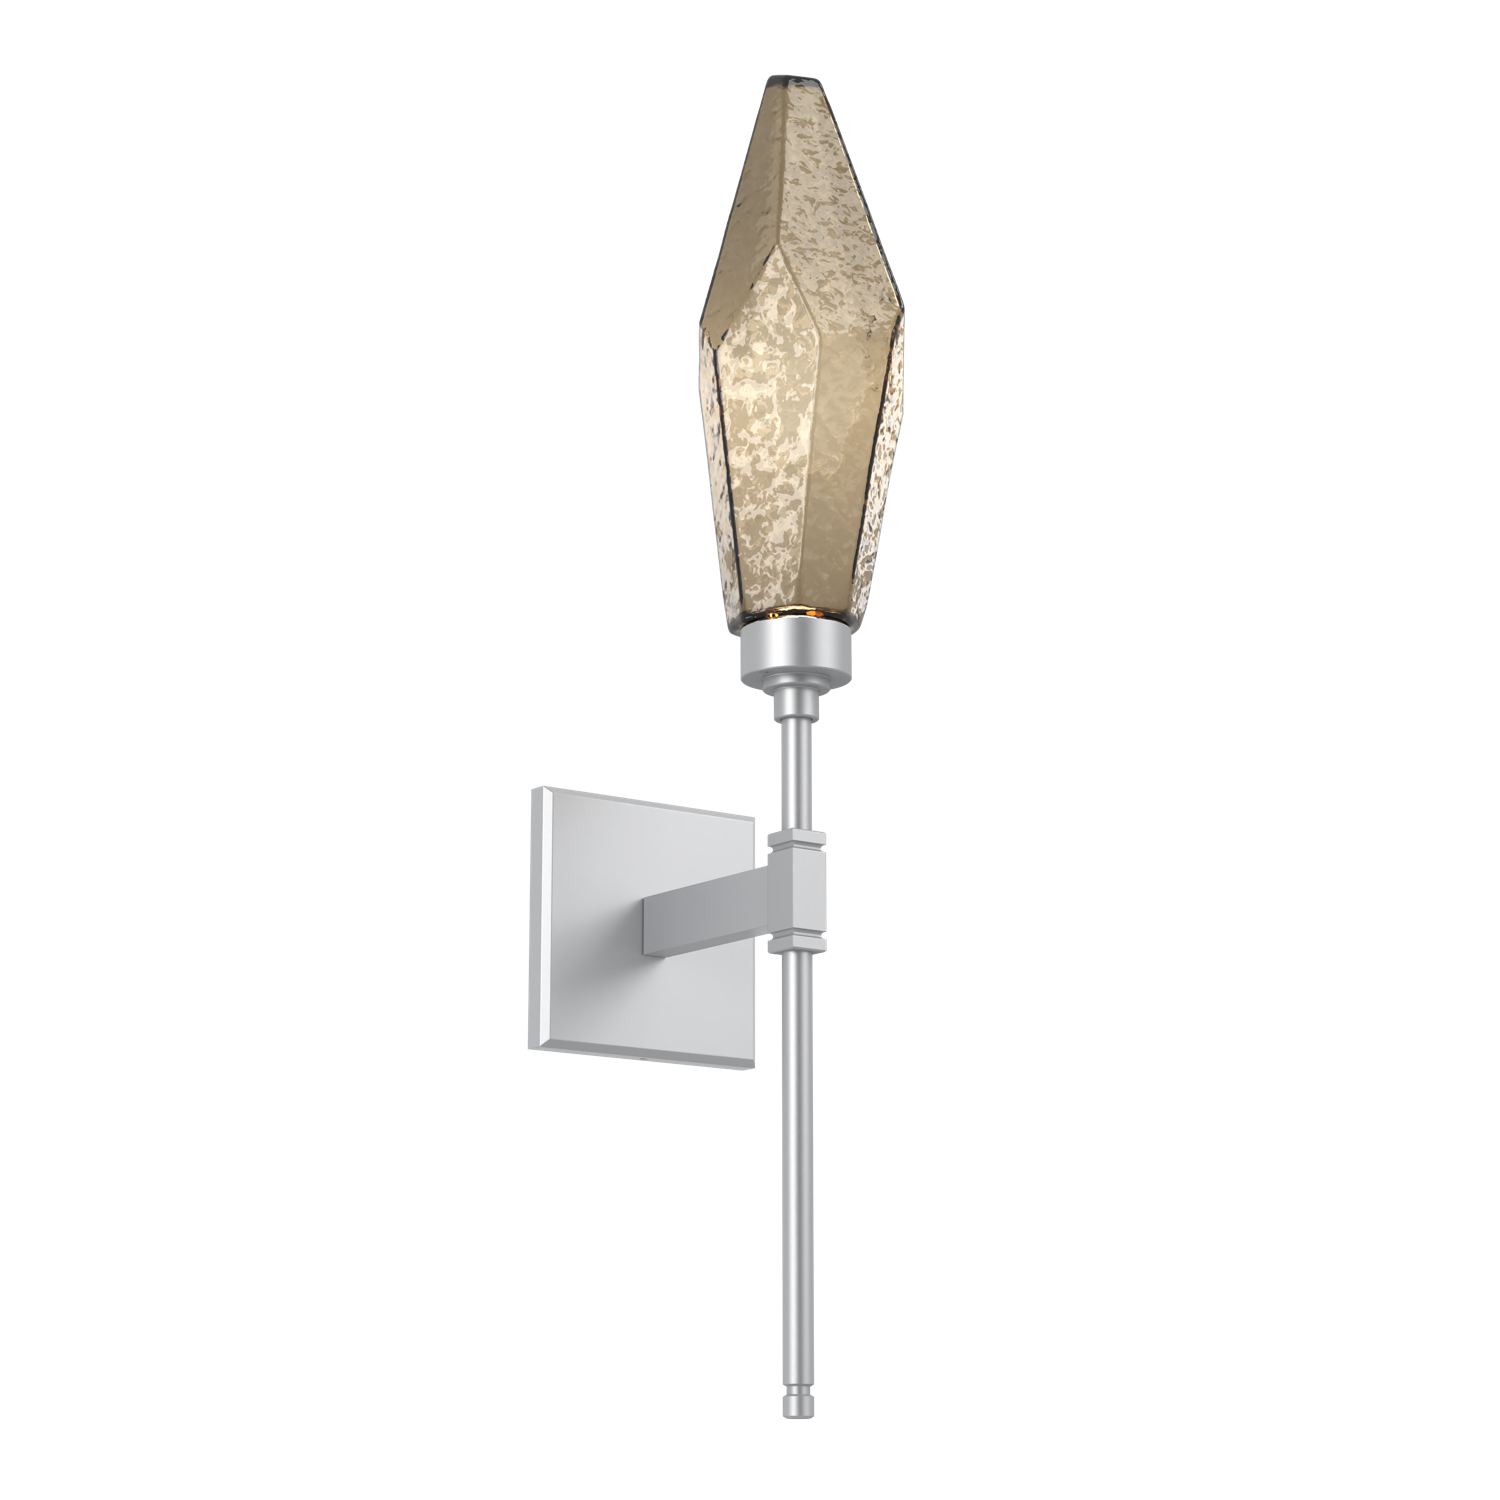 IDB0050-07-CS-CB-Hammerton-Studio-Rock-Crystal-belvedere-wall-sconce-with-classic-silver-finish-and-chilled-bronze-blown-glass-shades-and-LED-lamping